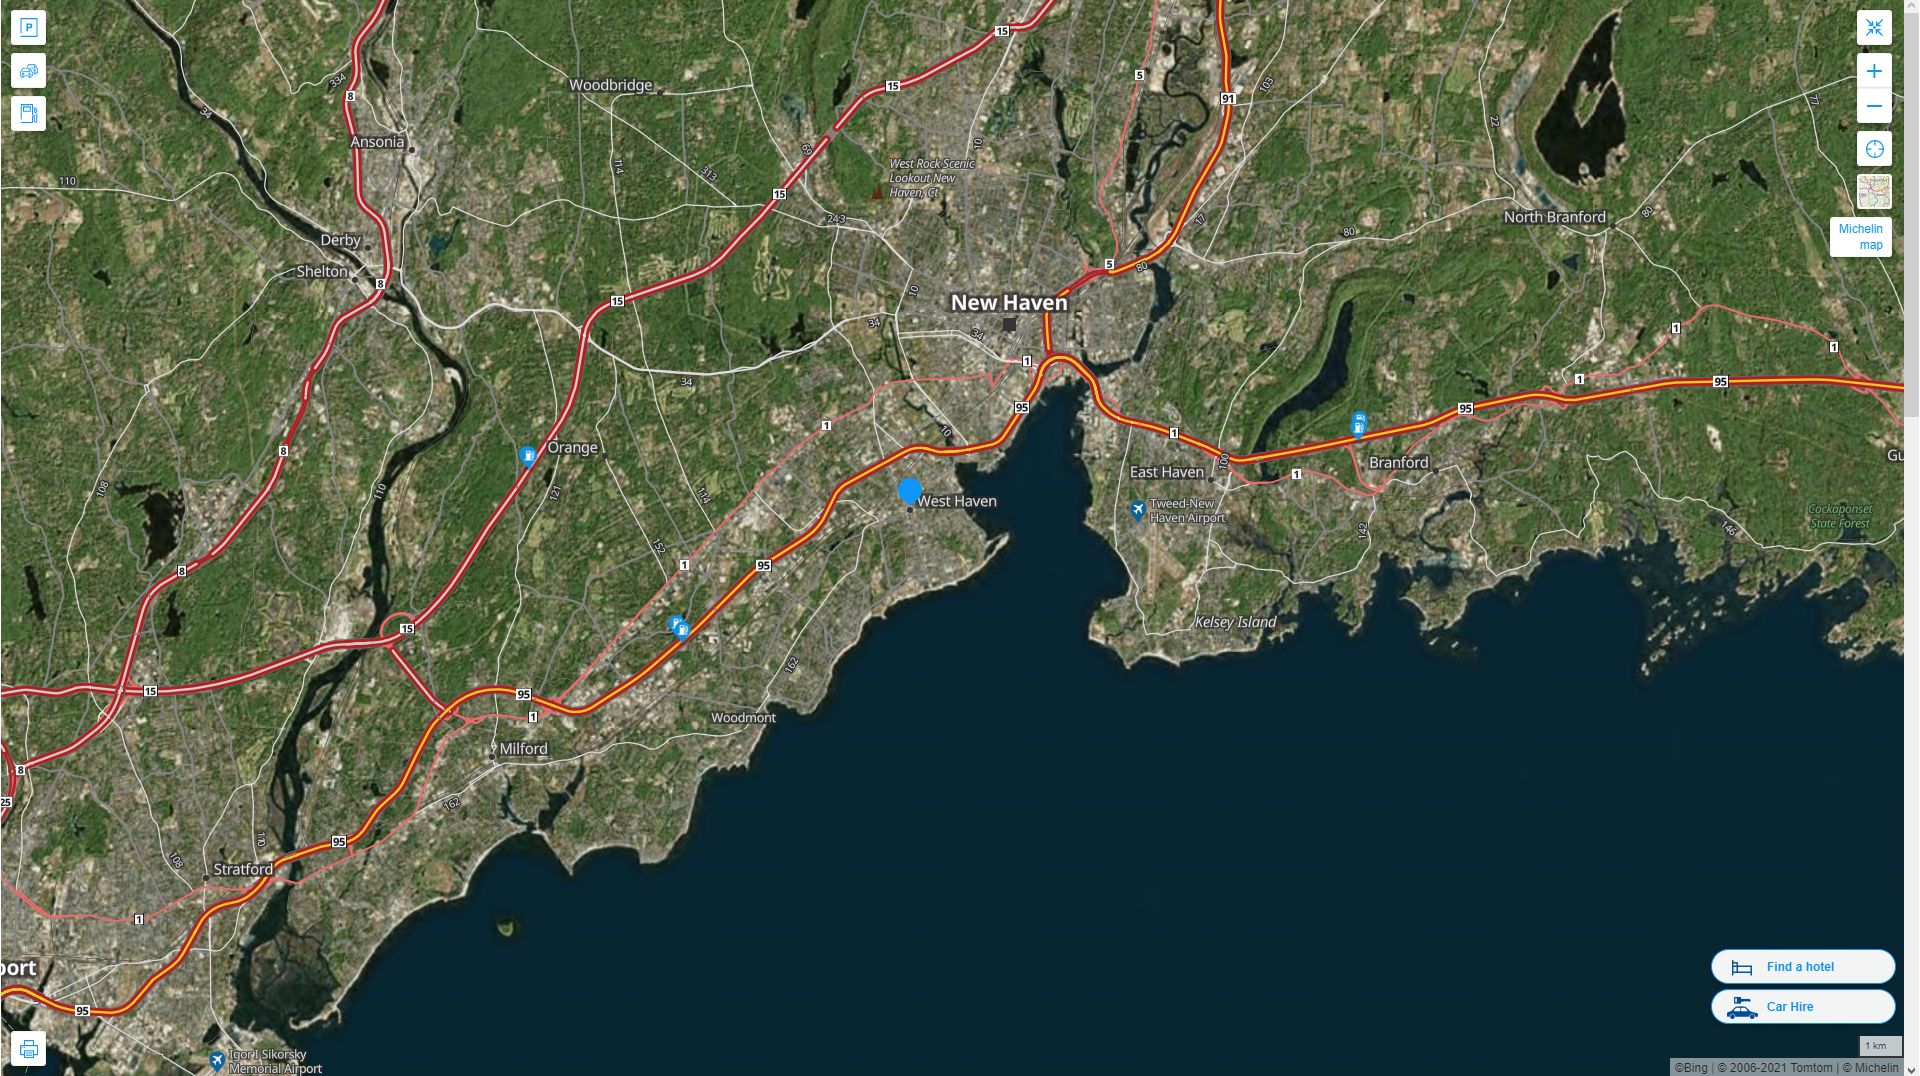 West Haven Connecticut Highway and Road Map with Satellite View